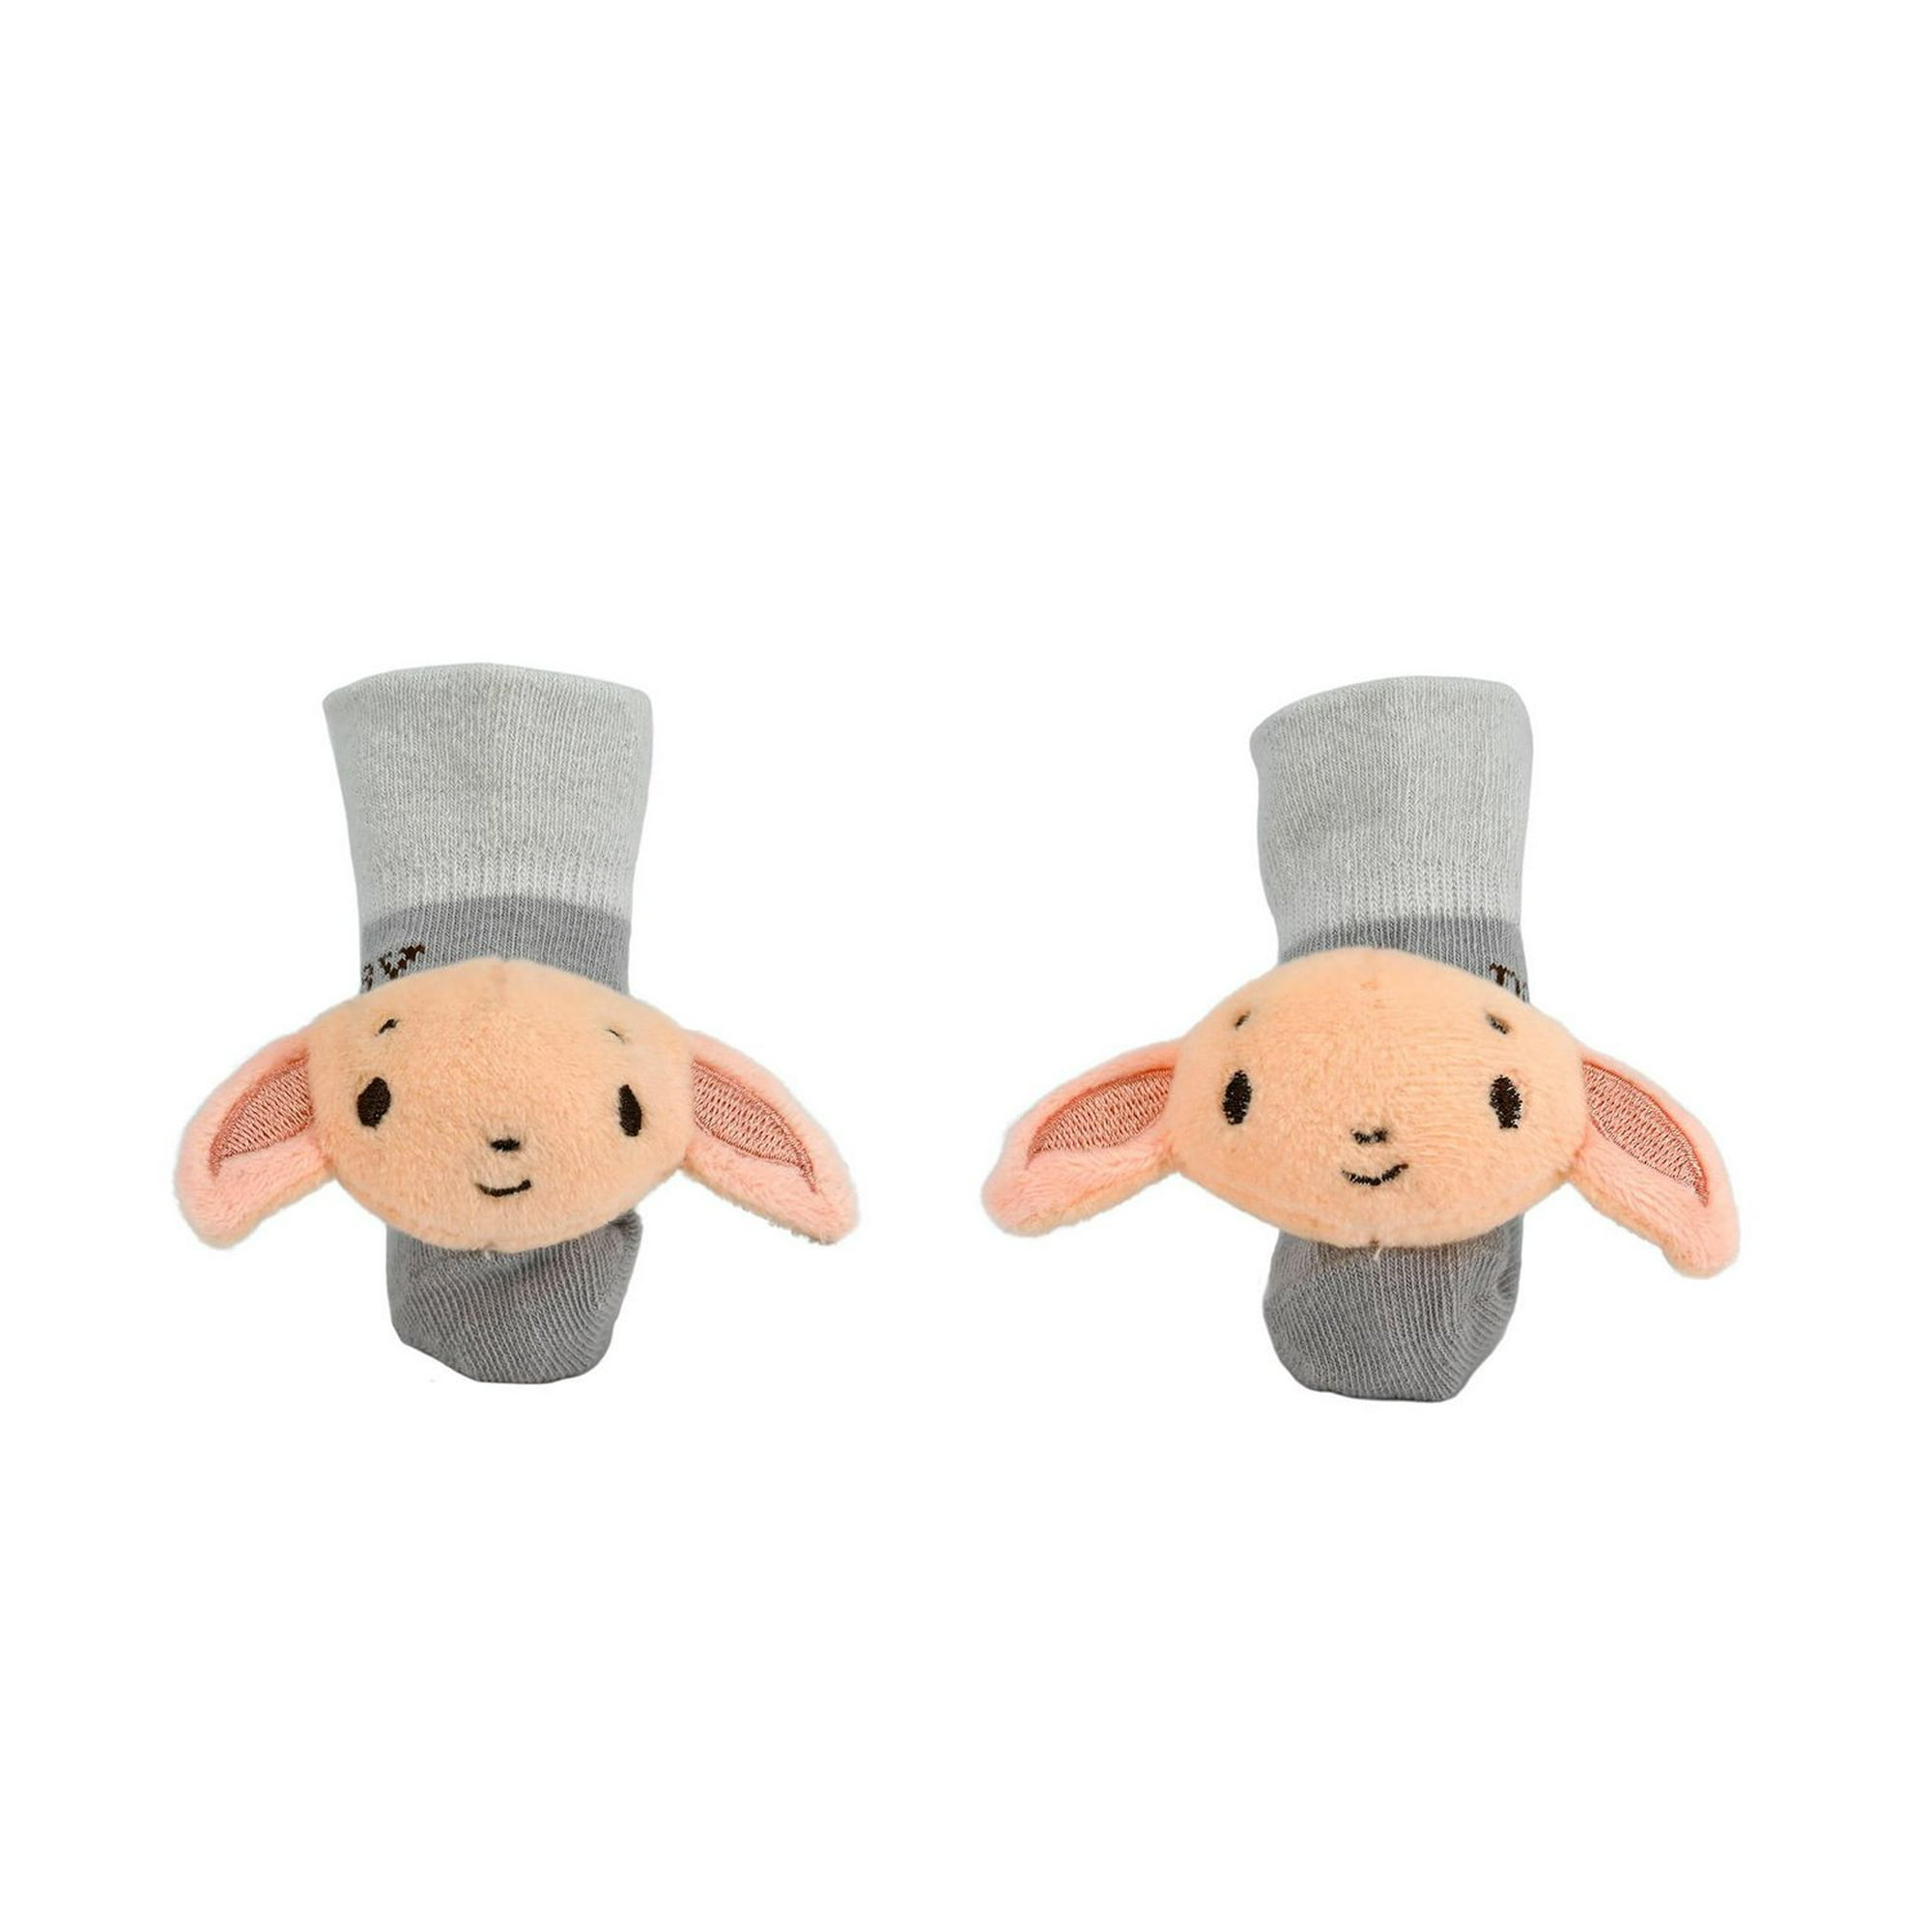 Harry Potter Dobby Foot Rattles, 2 pieces 